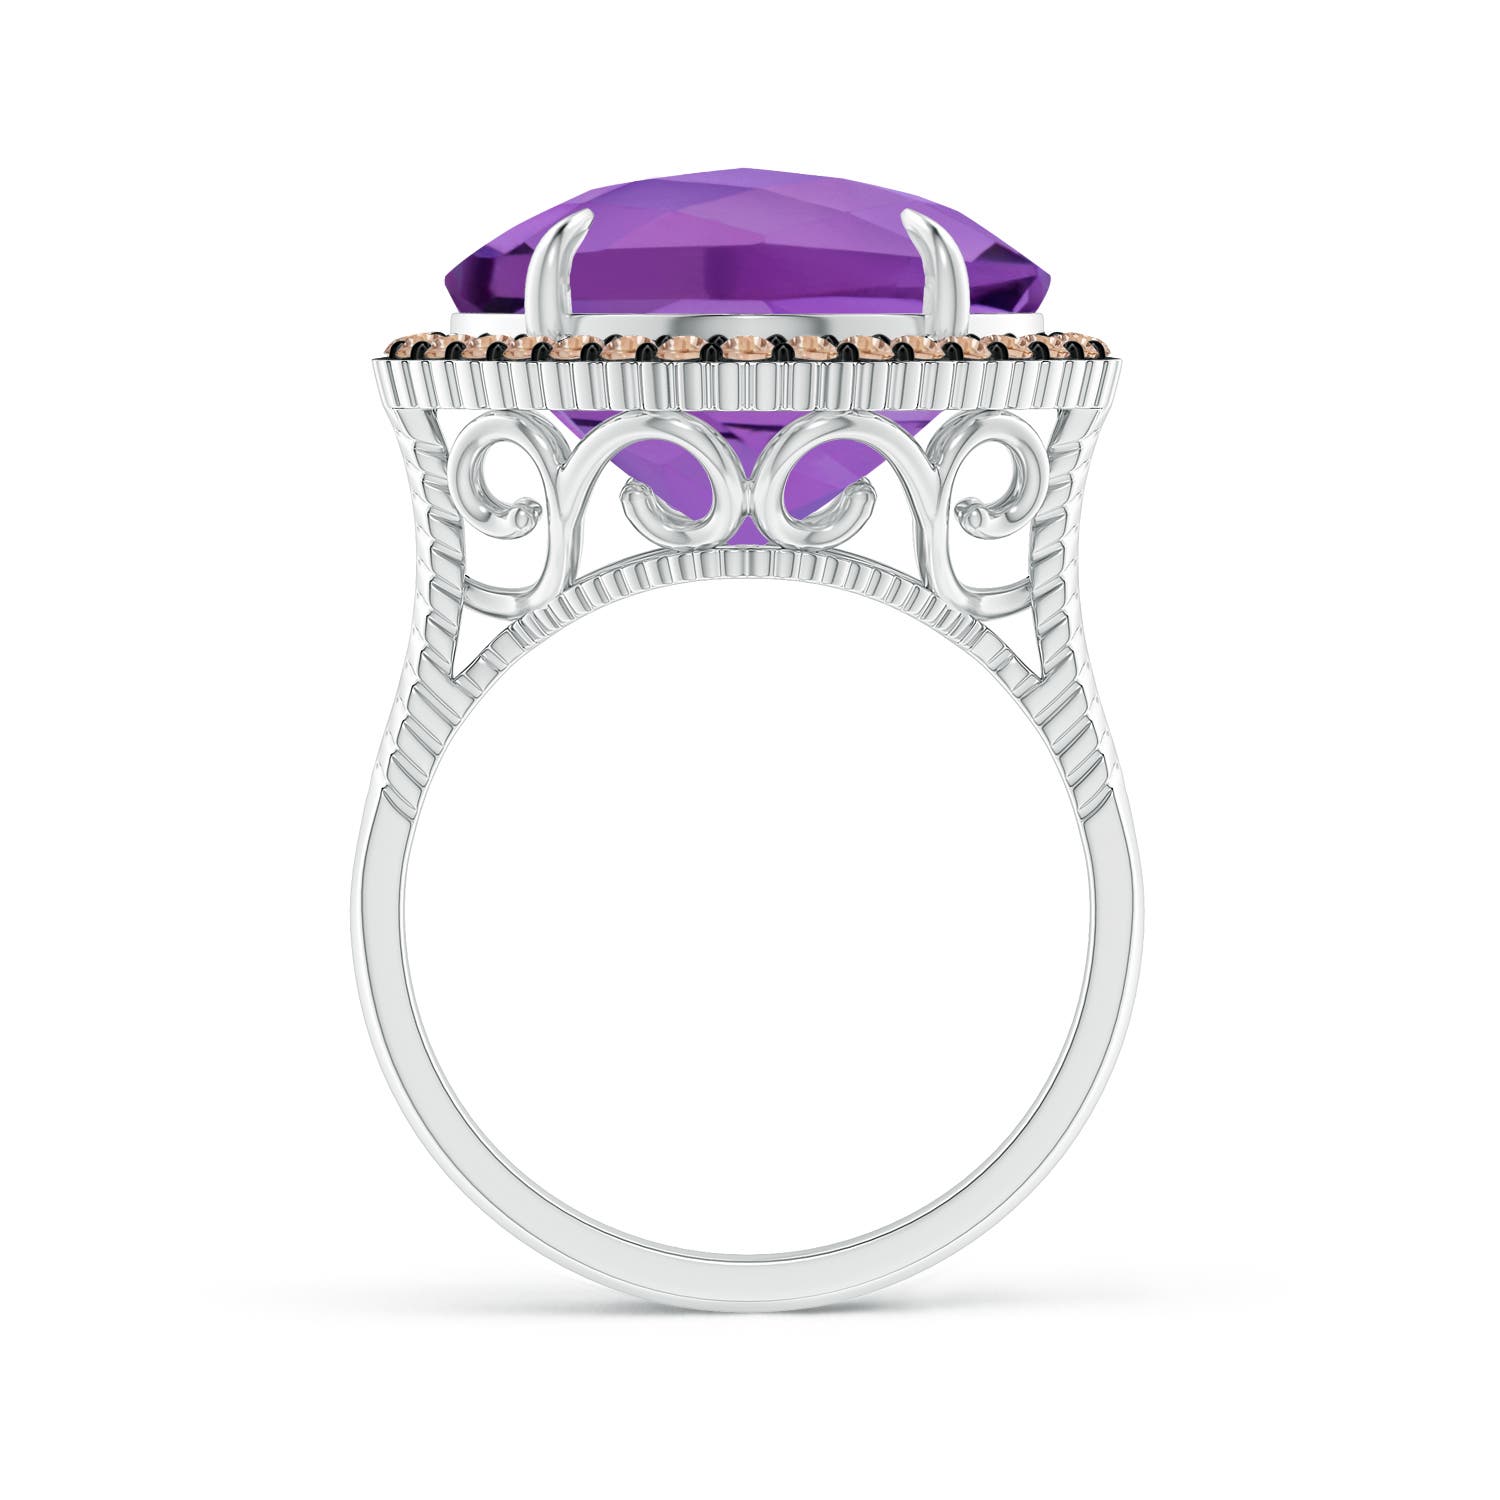 AA - Amethyst / 8.38 CT / 14 KT White Gold